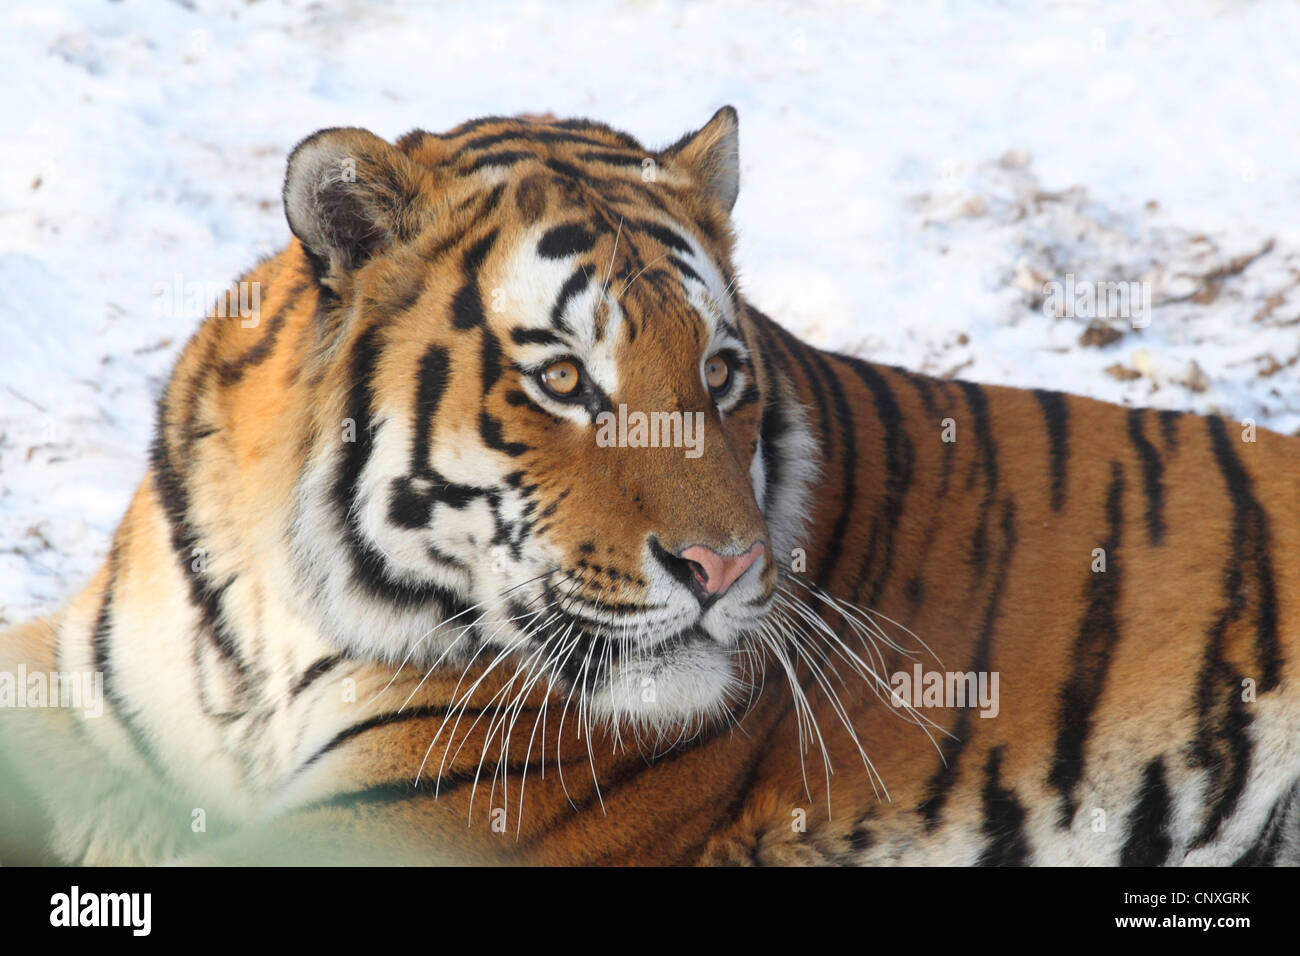 Siberian tiger, Amurian tiger (Panthera tigris altaica), portrait, sitting in the snow Stock Photo